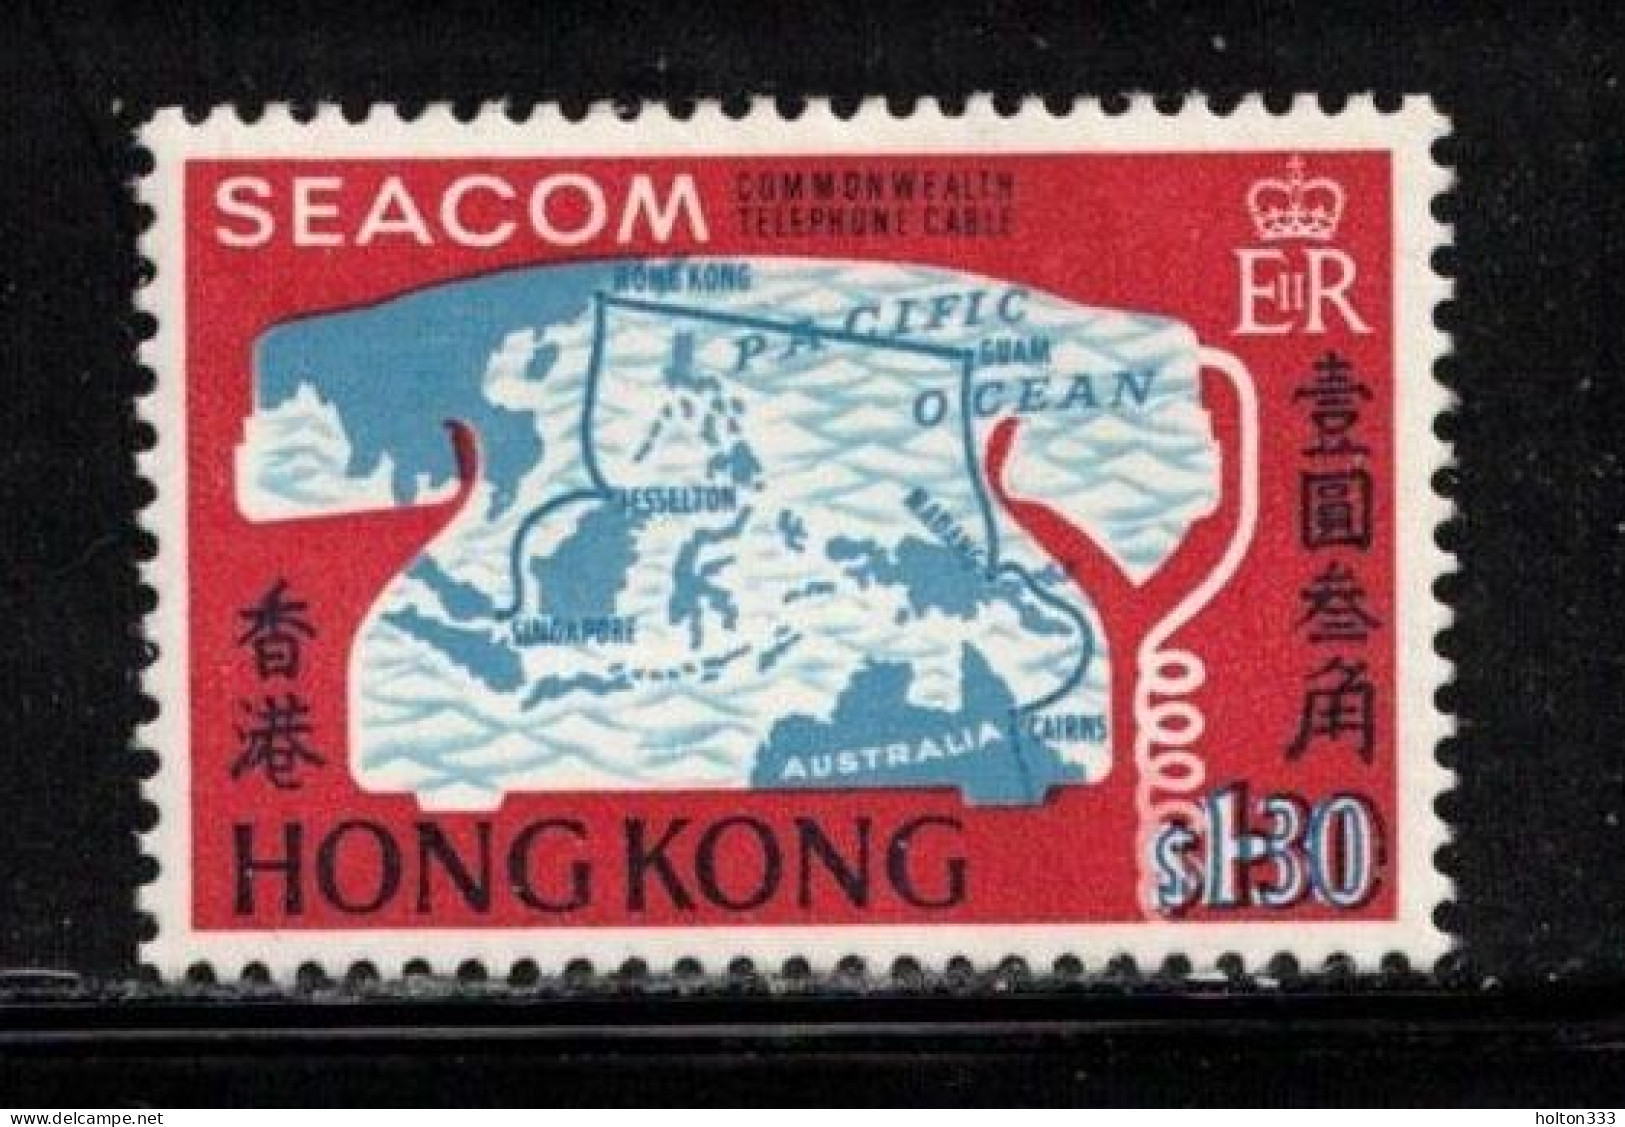 HONG KONG Scott # 236 MH - Commonwealth Telephone Cable - Unused Stamps